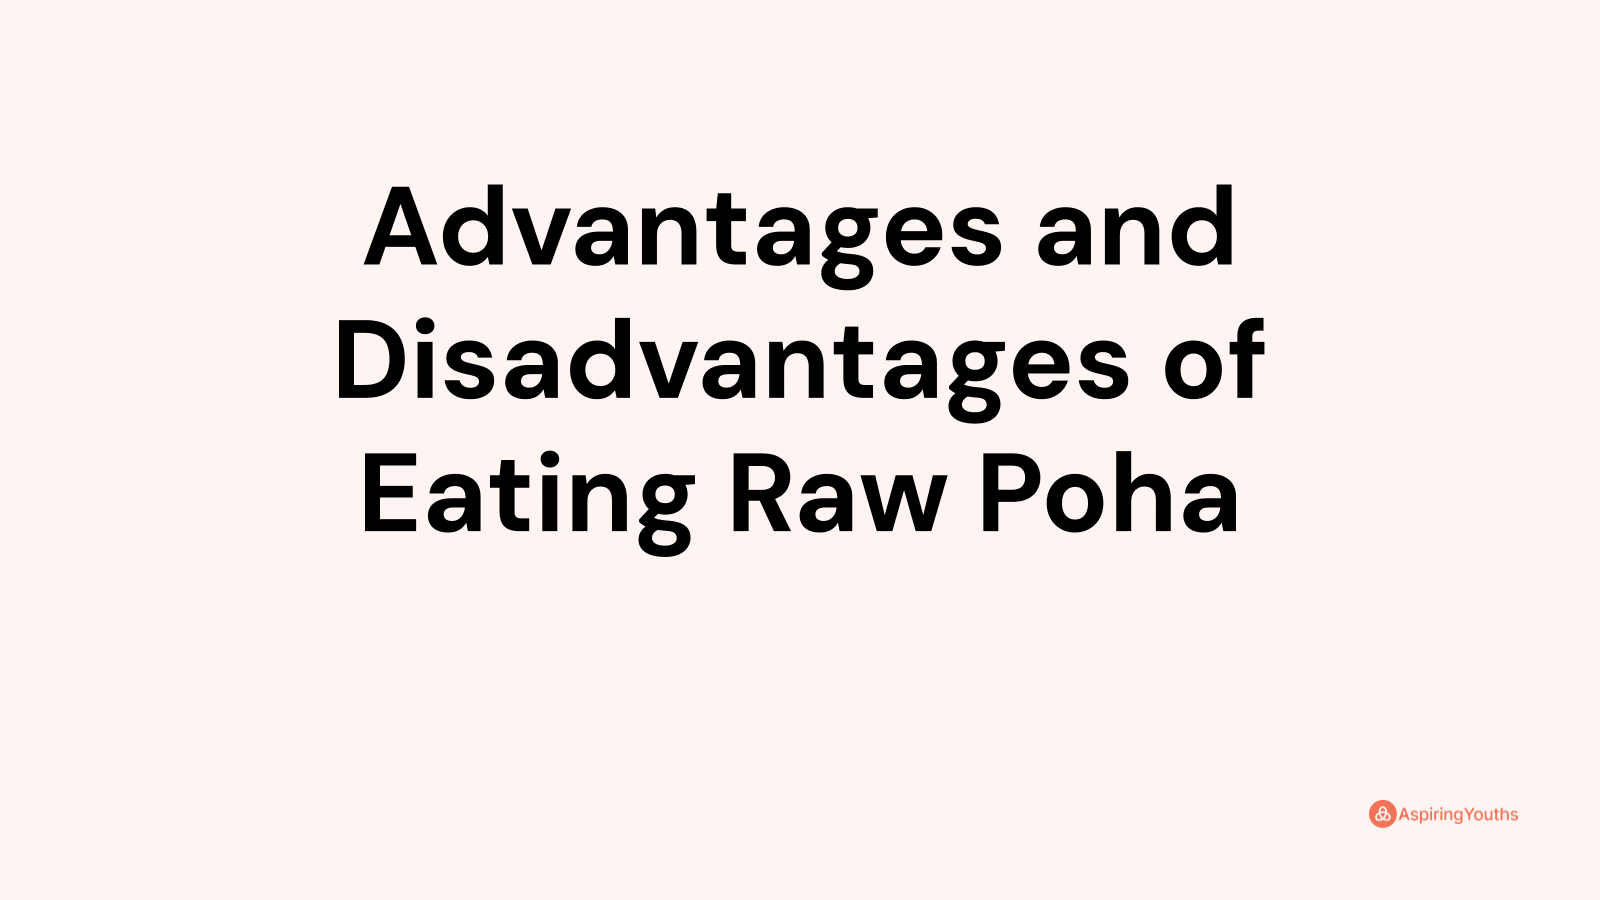 Advantages and disadvantages of Eating Raw Poha